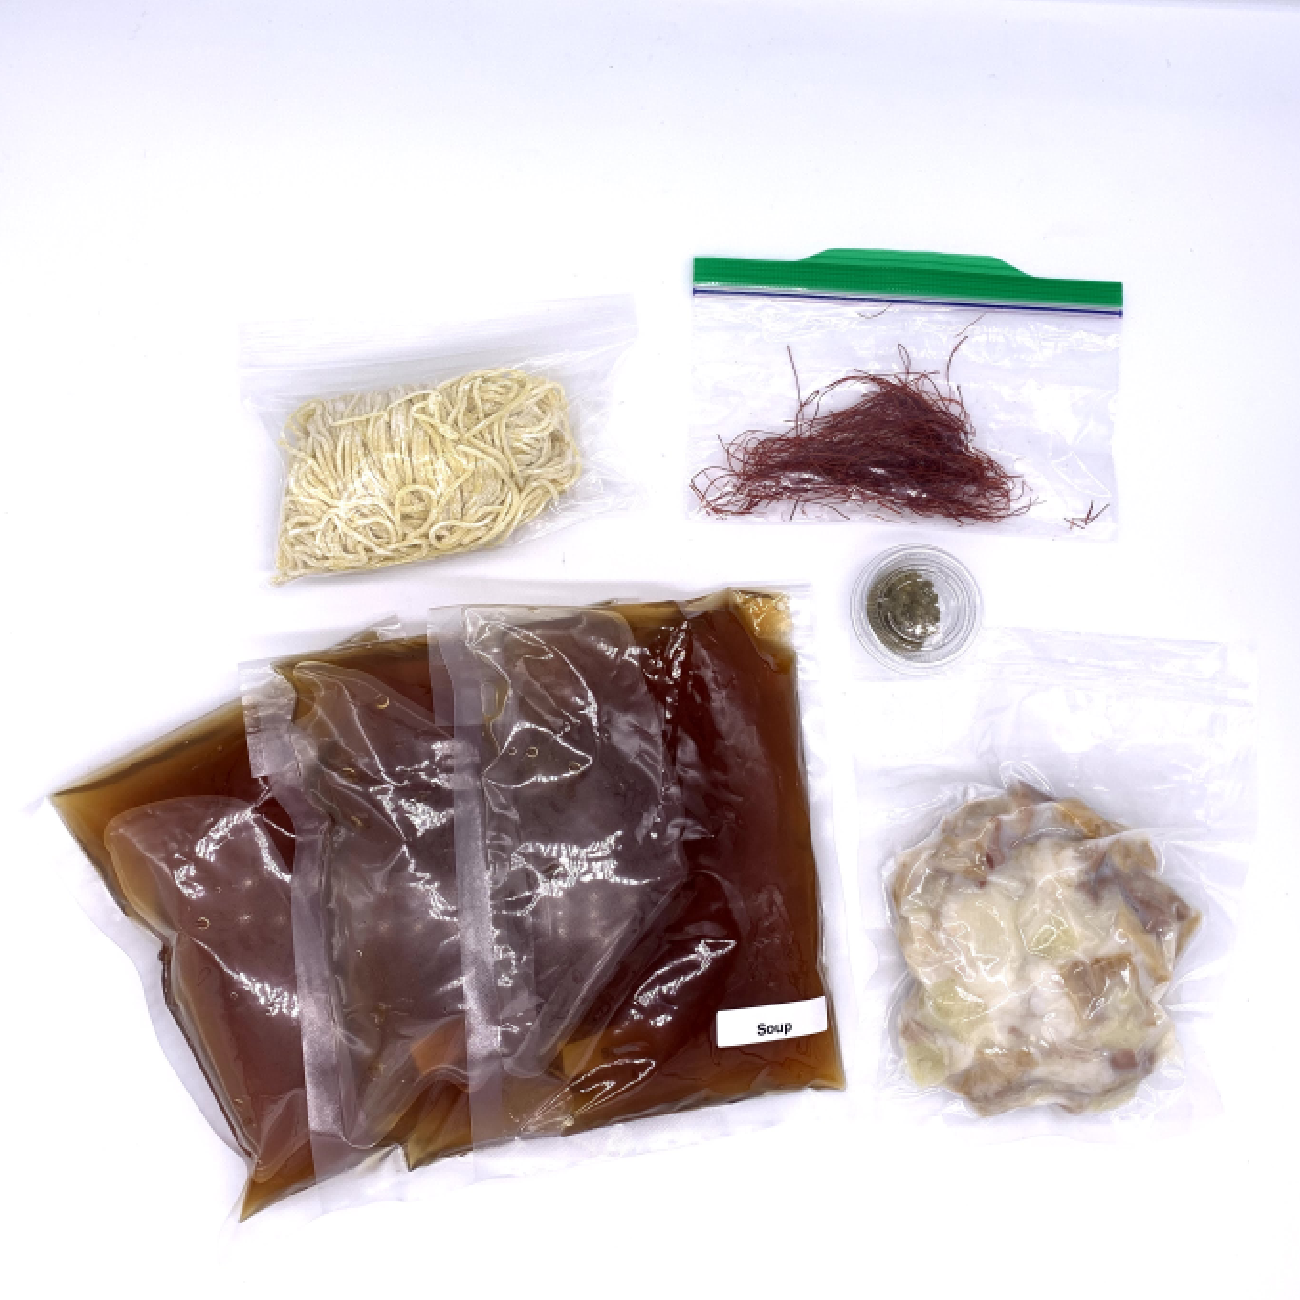 3 shoyu soup packages with vacuum packed offal, noodles in zip bag, shredded chilli in zip bag and yuzu pepper in small container.